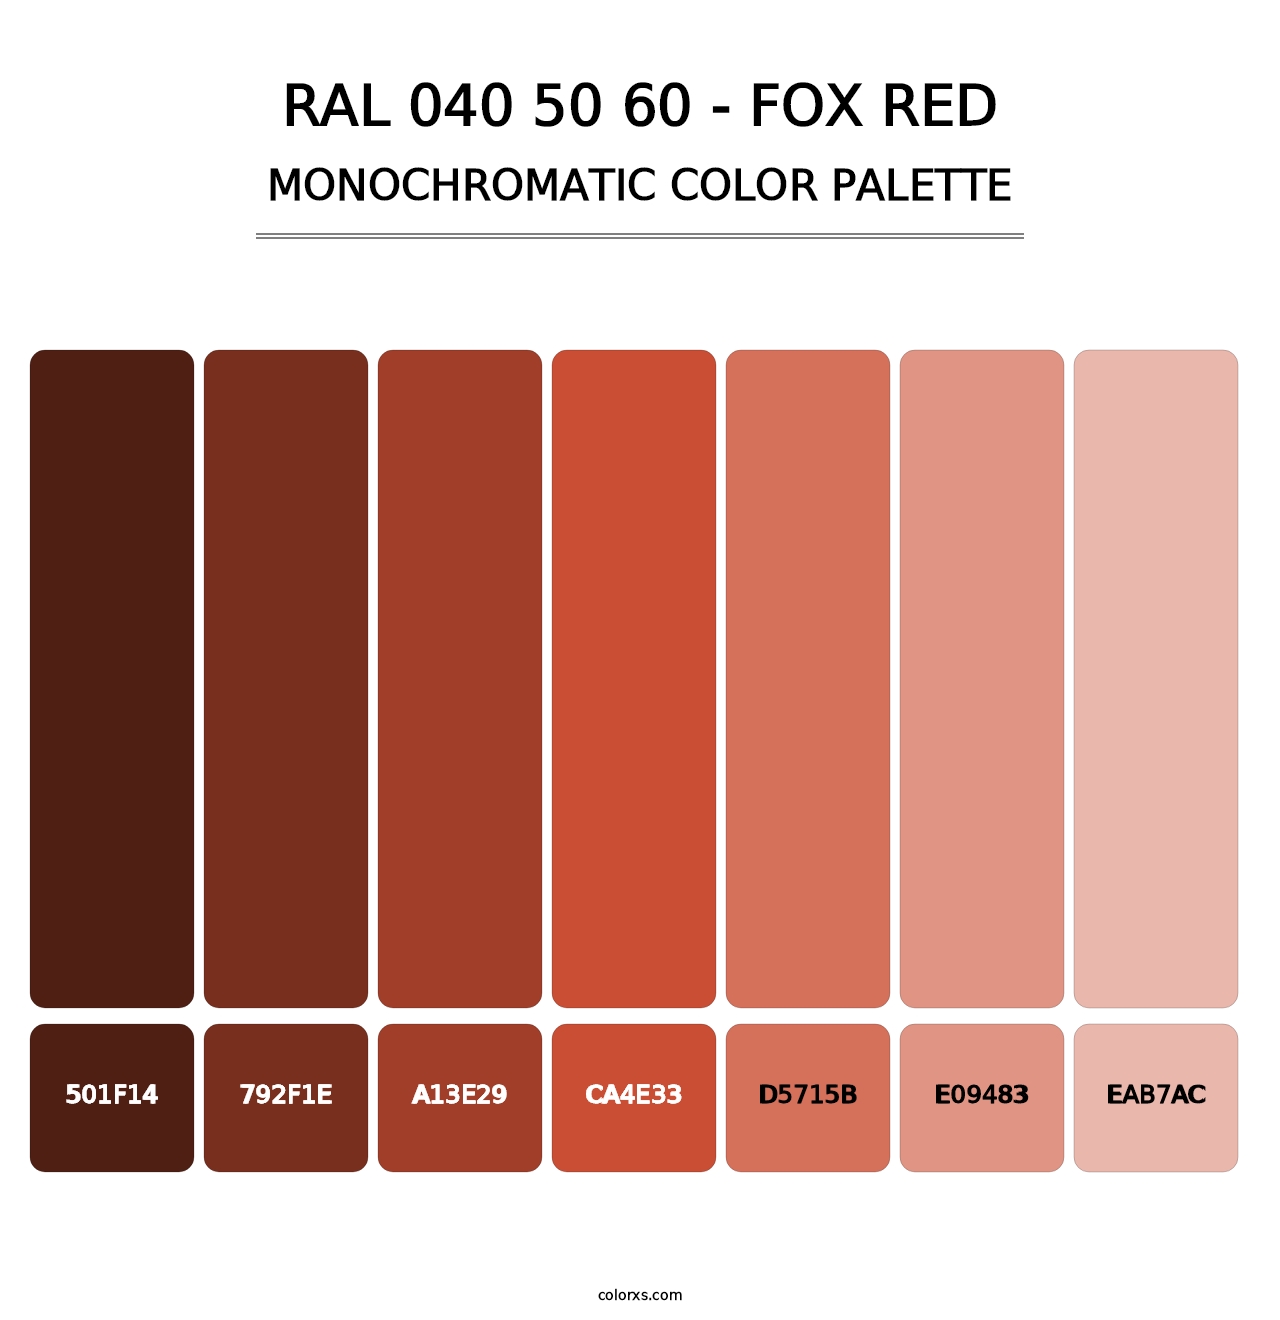 RAL 040 50 60 - Fox Red - Monochromatic Color Palette